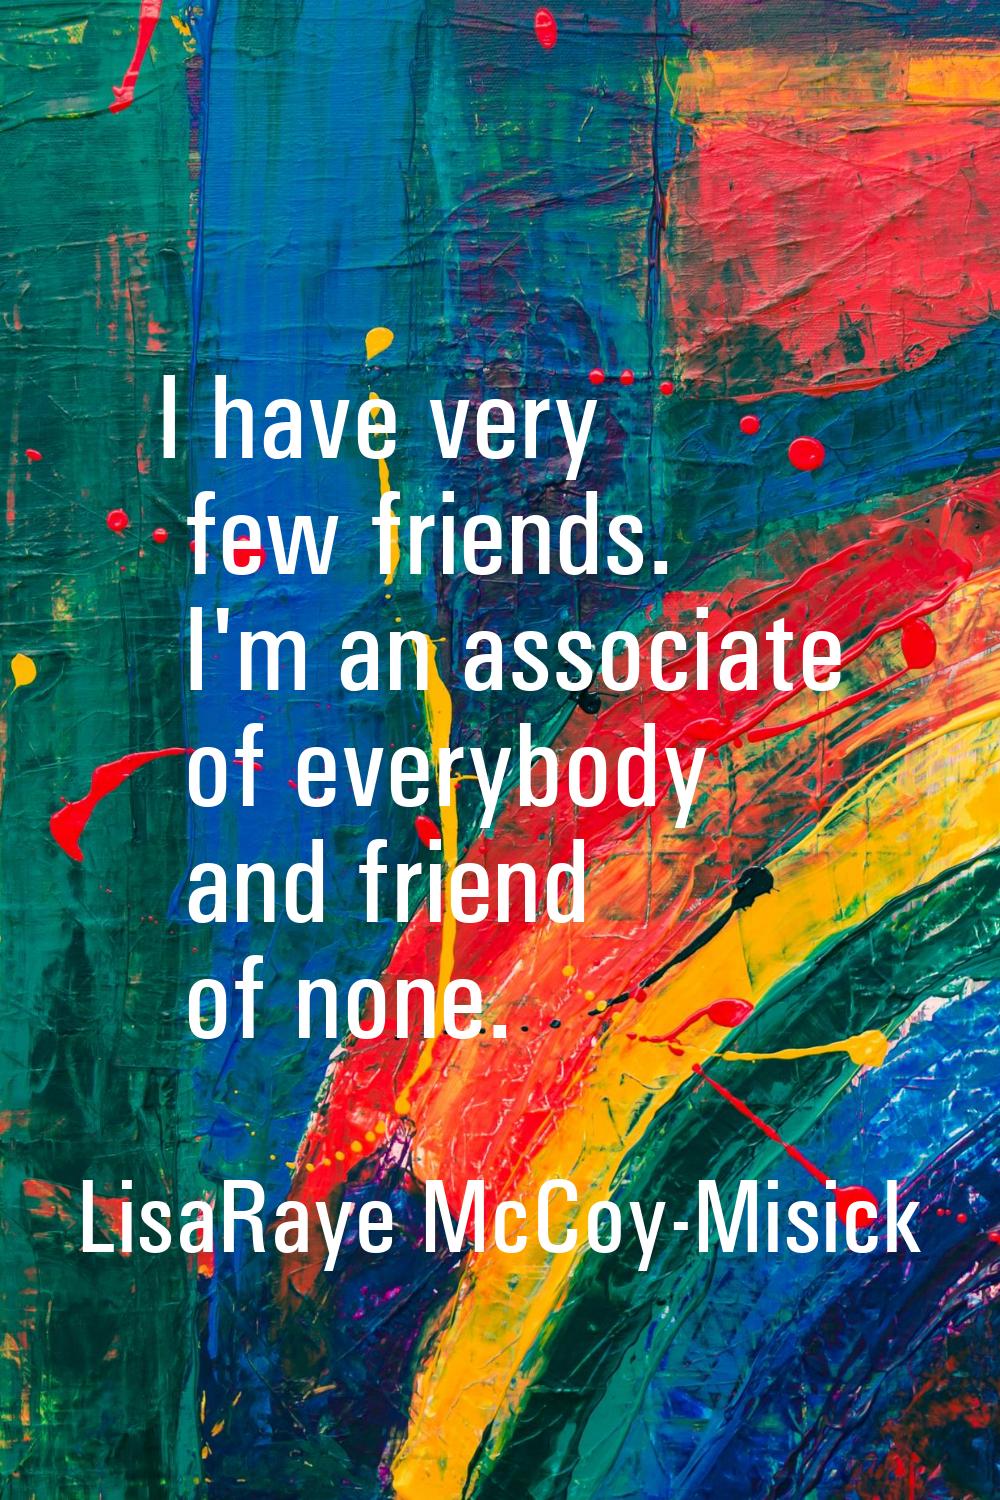 I have very few friends. I'm an associate of everybody and friend of none.